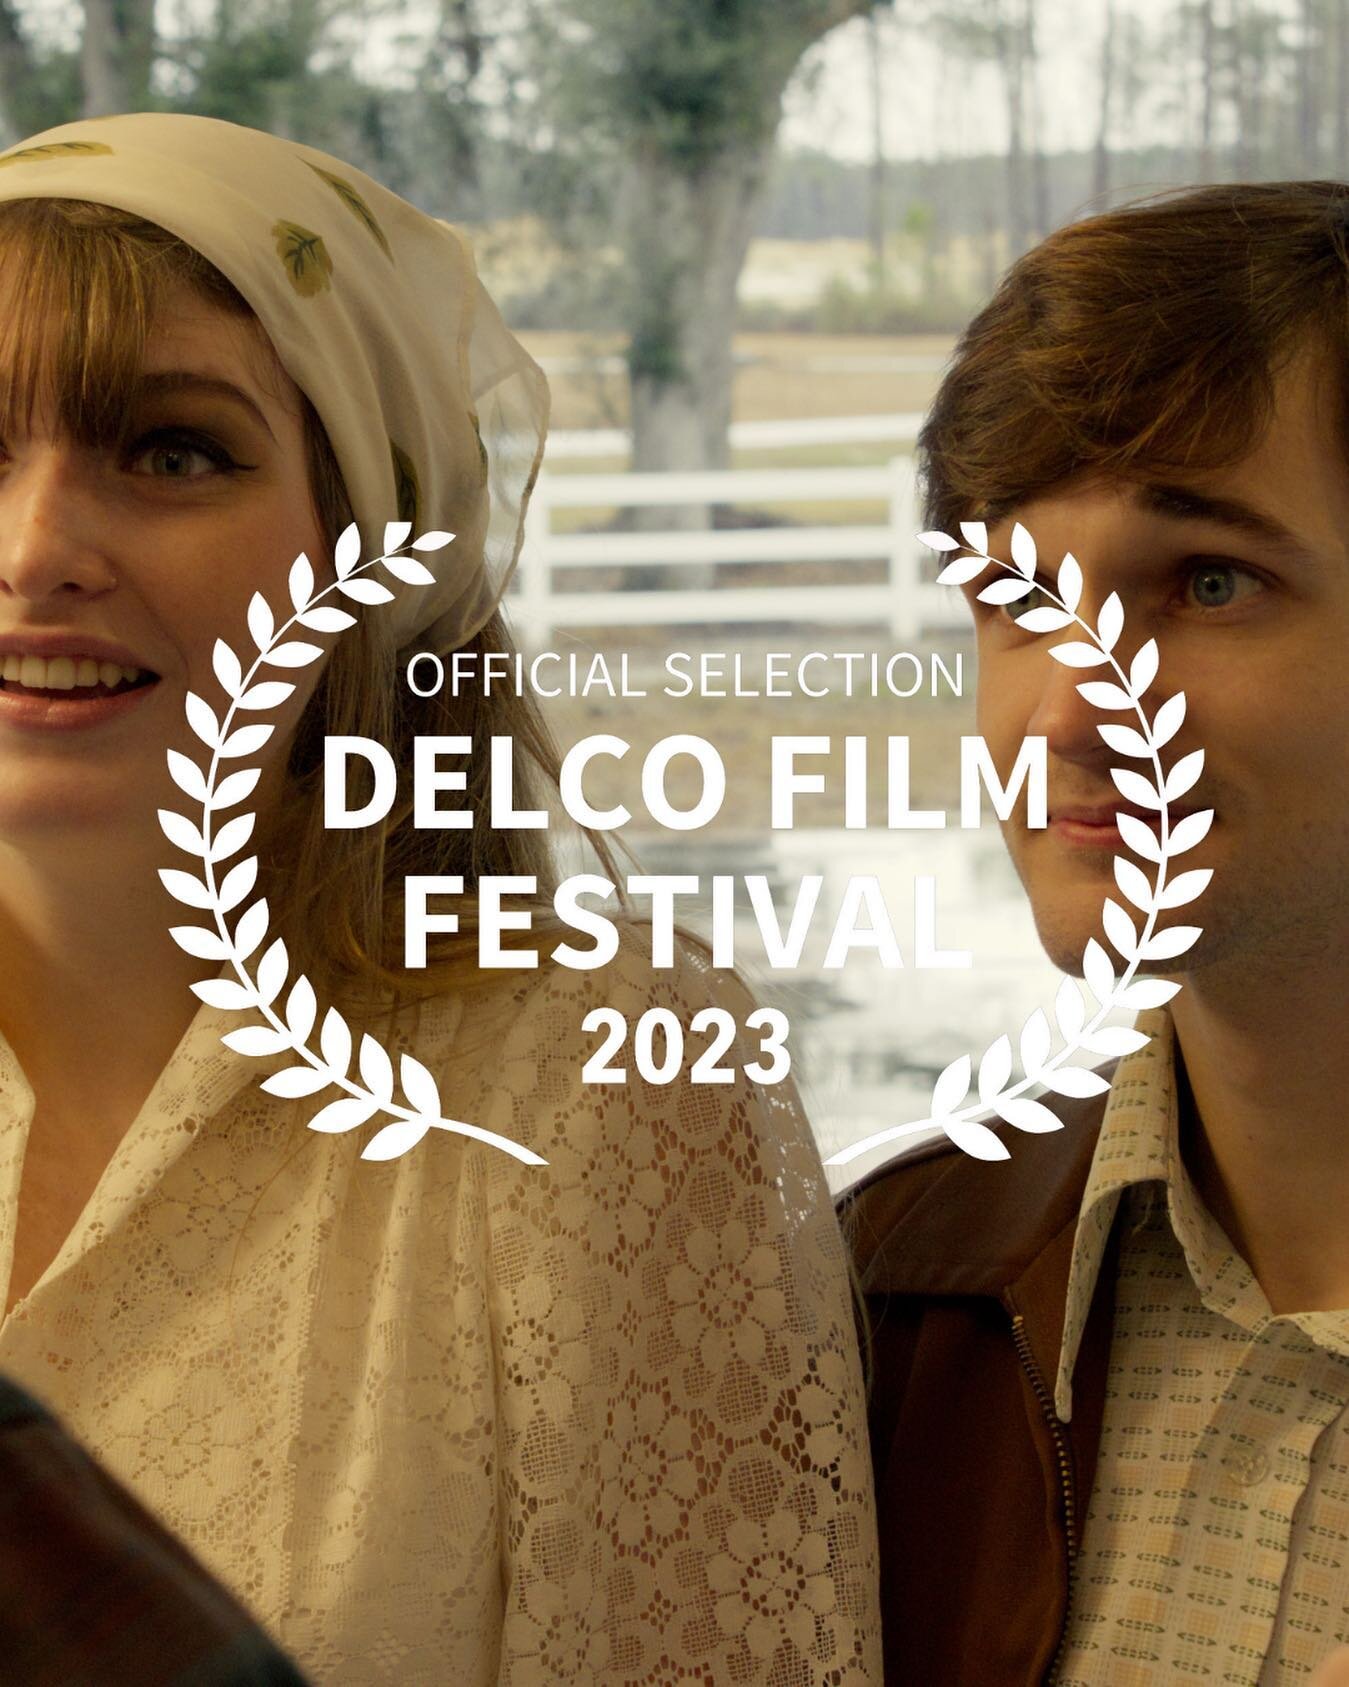 not only was daisies an official selection of the Delco Film Festival, our film screened this evening at the 7th anniversary of this great event!

thank you all for your continuing support! 🌼☺️